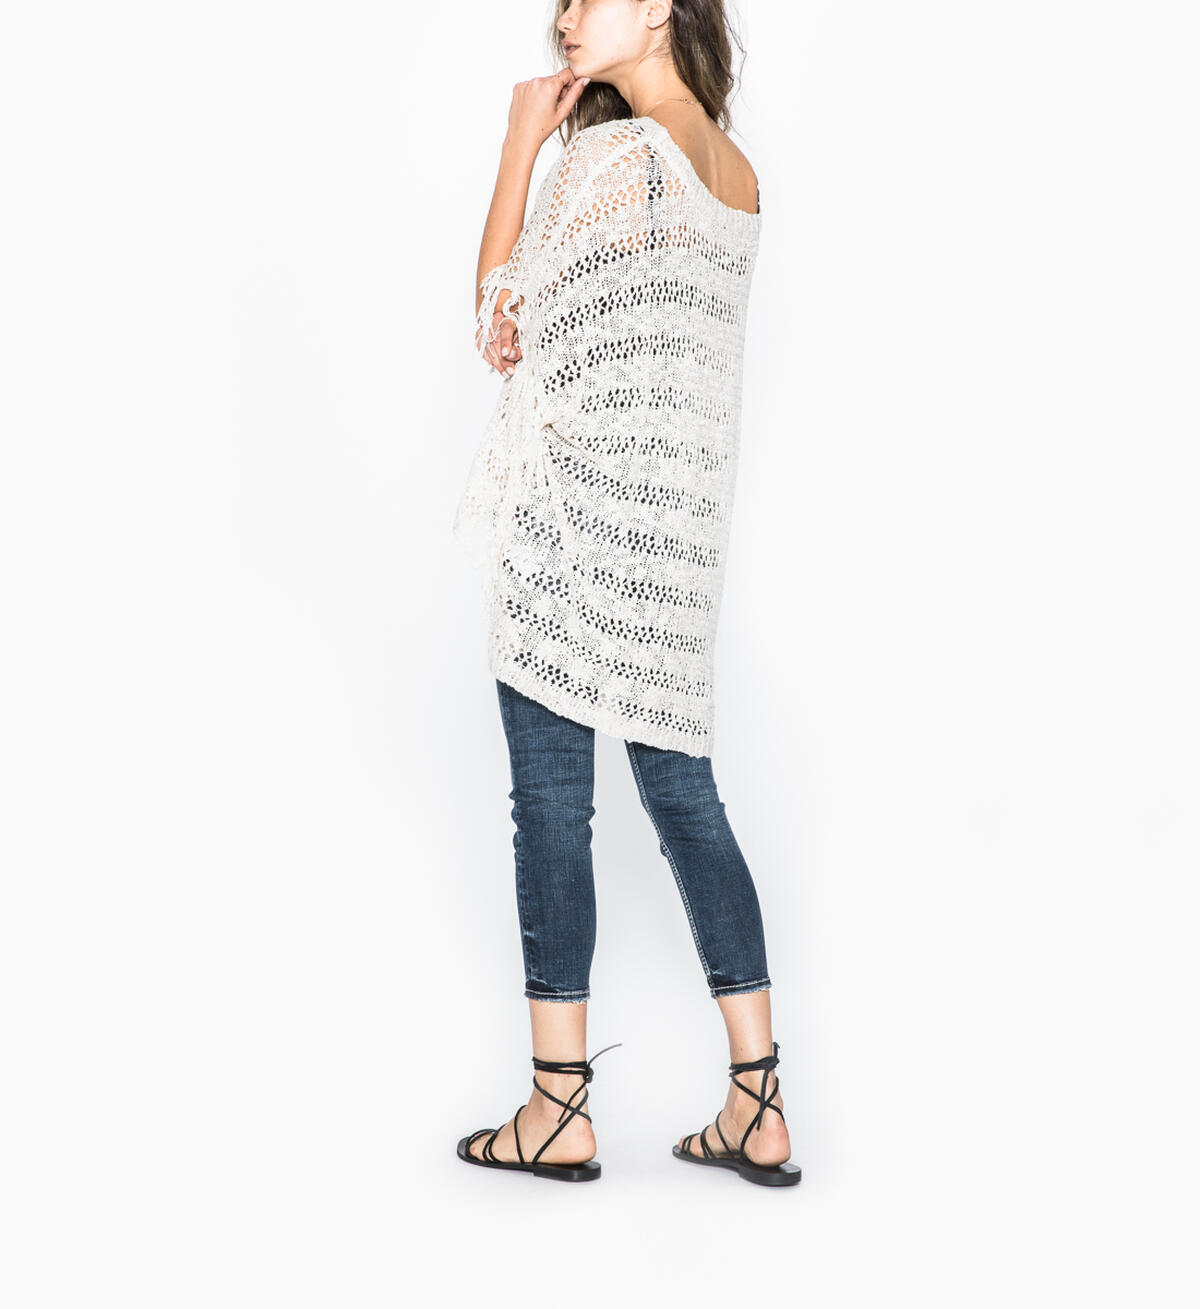 Sierra - Poncho Sweater With Fringe, , hi-res image number 1